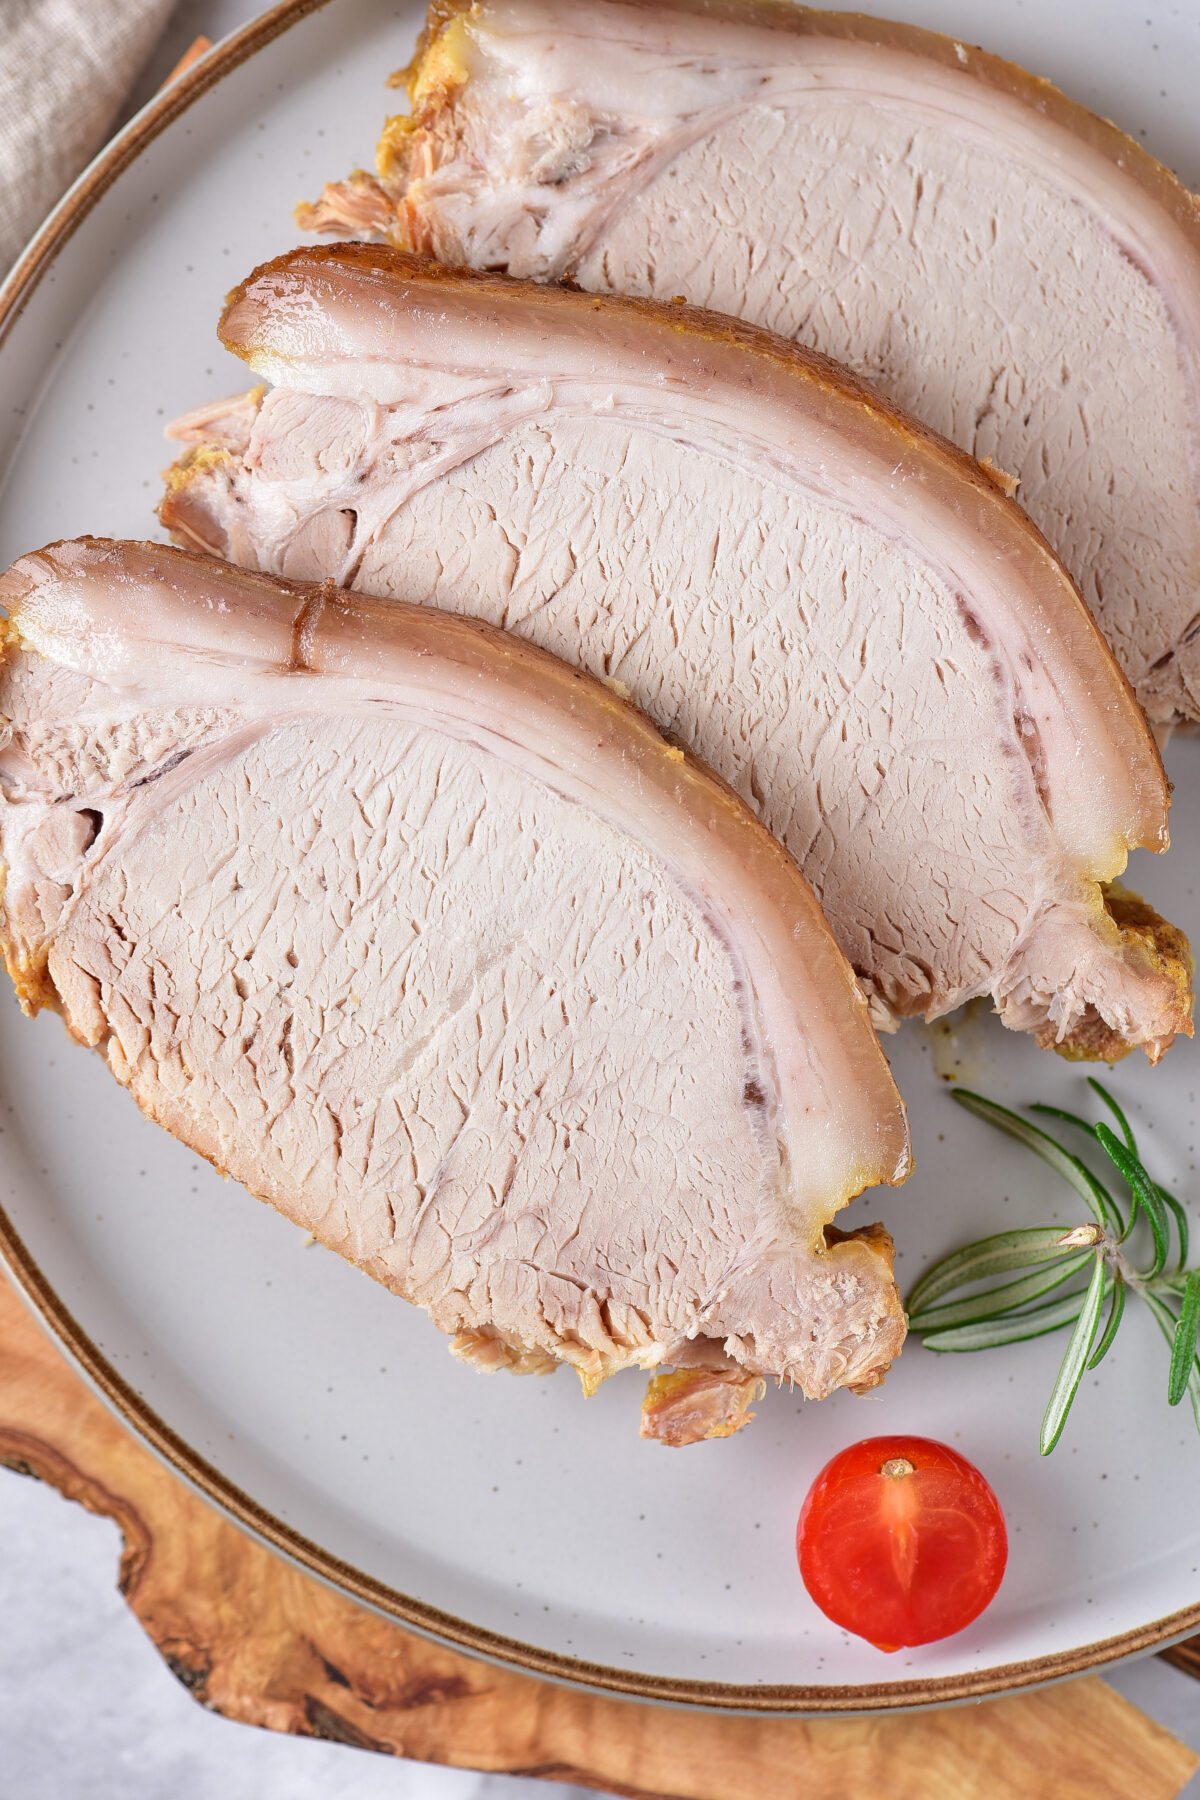 Looking for a delicious and easy pork recipe? This honey mustard pork loin recipe is perfect for any night of the week!